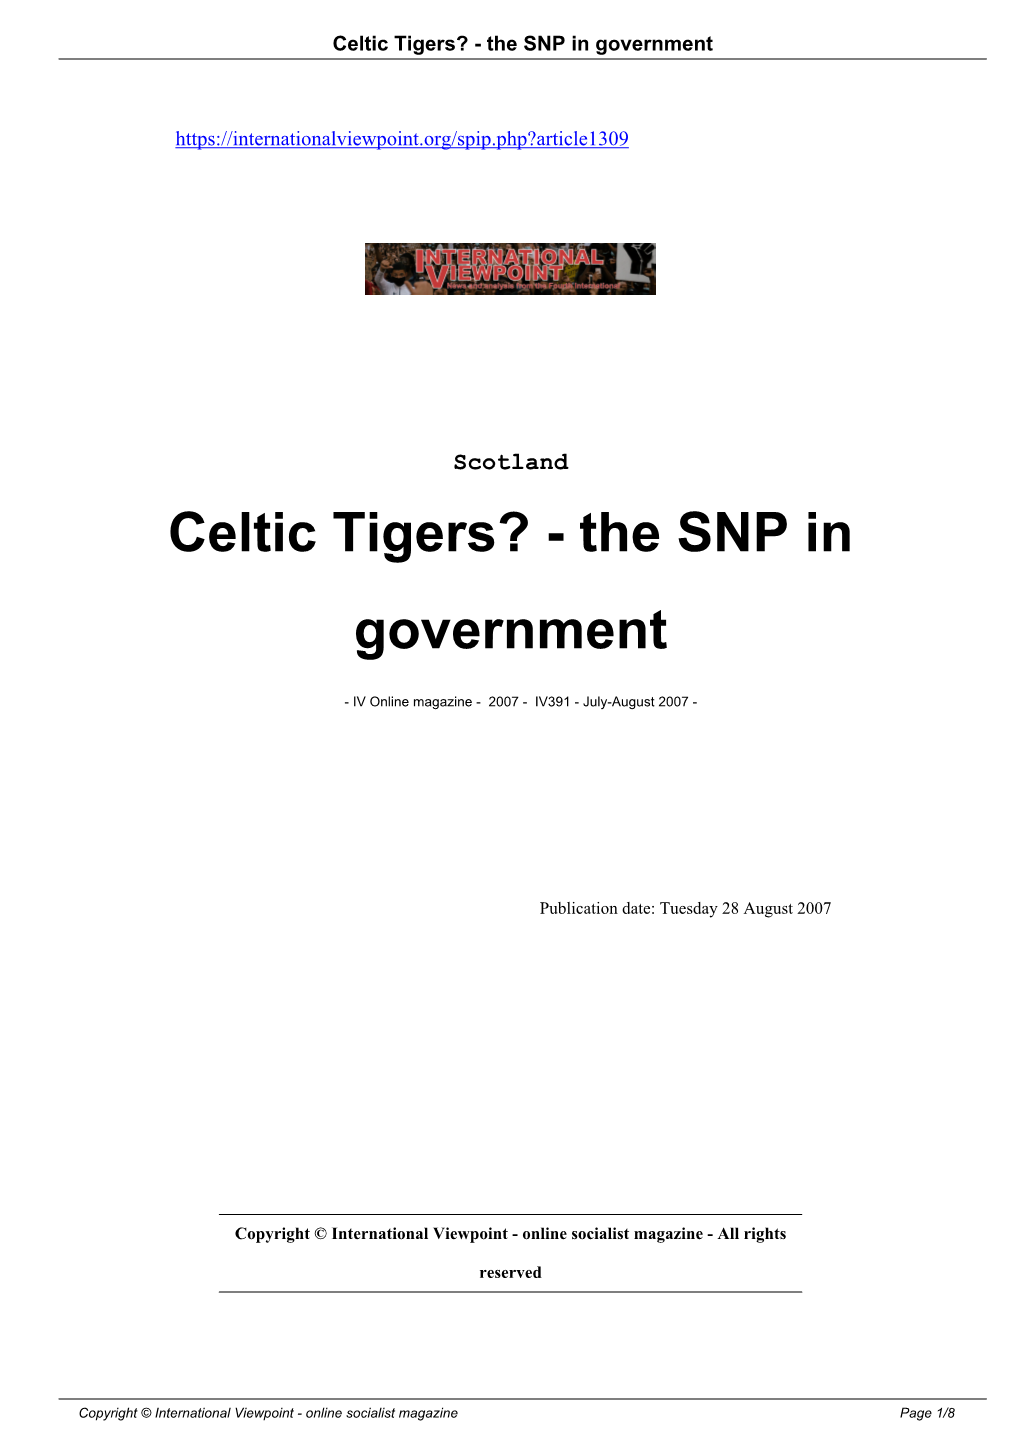 Celtic Tigers? - the SNP in Government